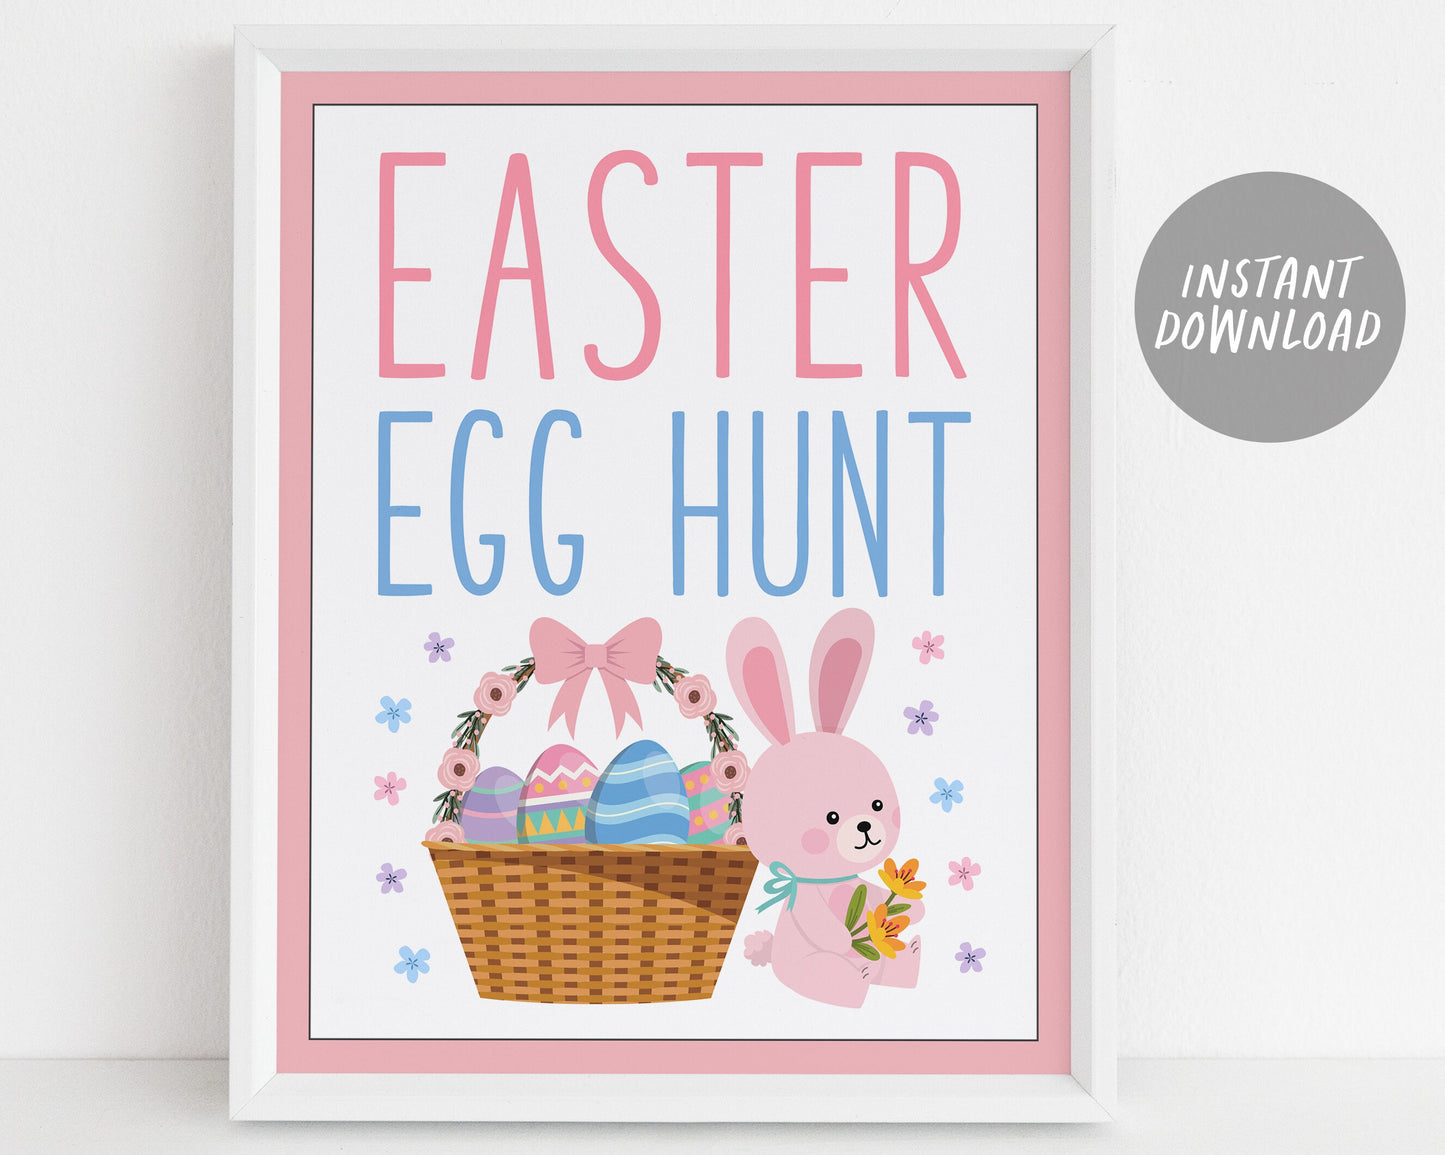 Easter Bunny Spring Signs BUNDLE For Wedding Baby Shower Birthday, Rabbit Pastel Themed Birthday Table Decor, Easter Egg Hunt Sign Printable